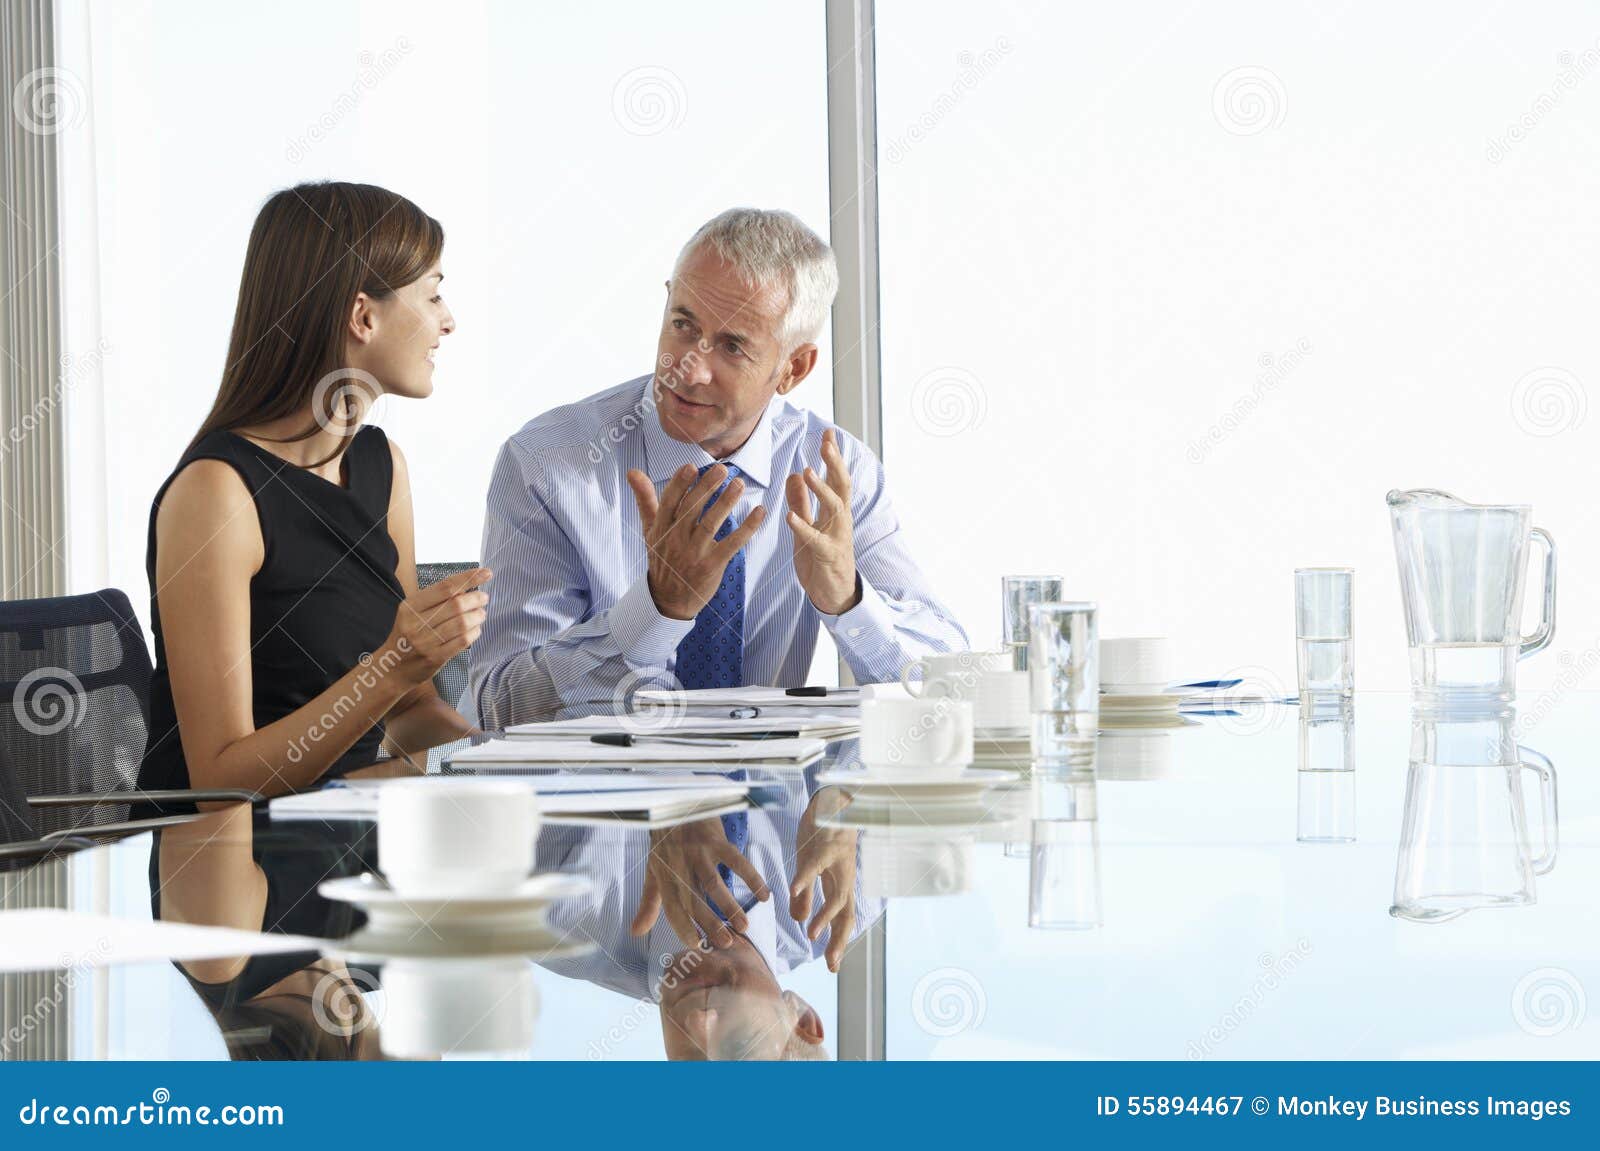 two business colleagues sitting around boardroom table having informal discussion